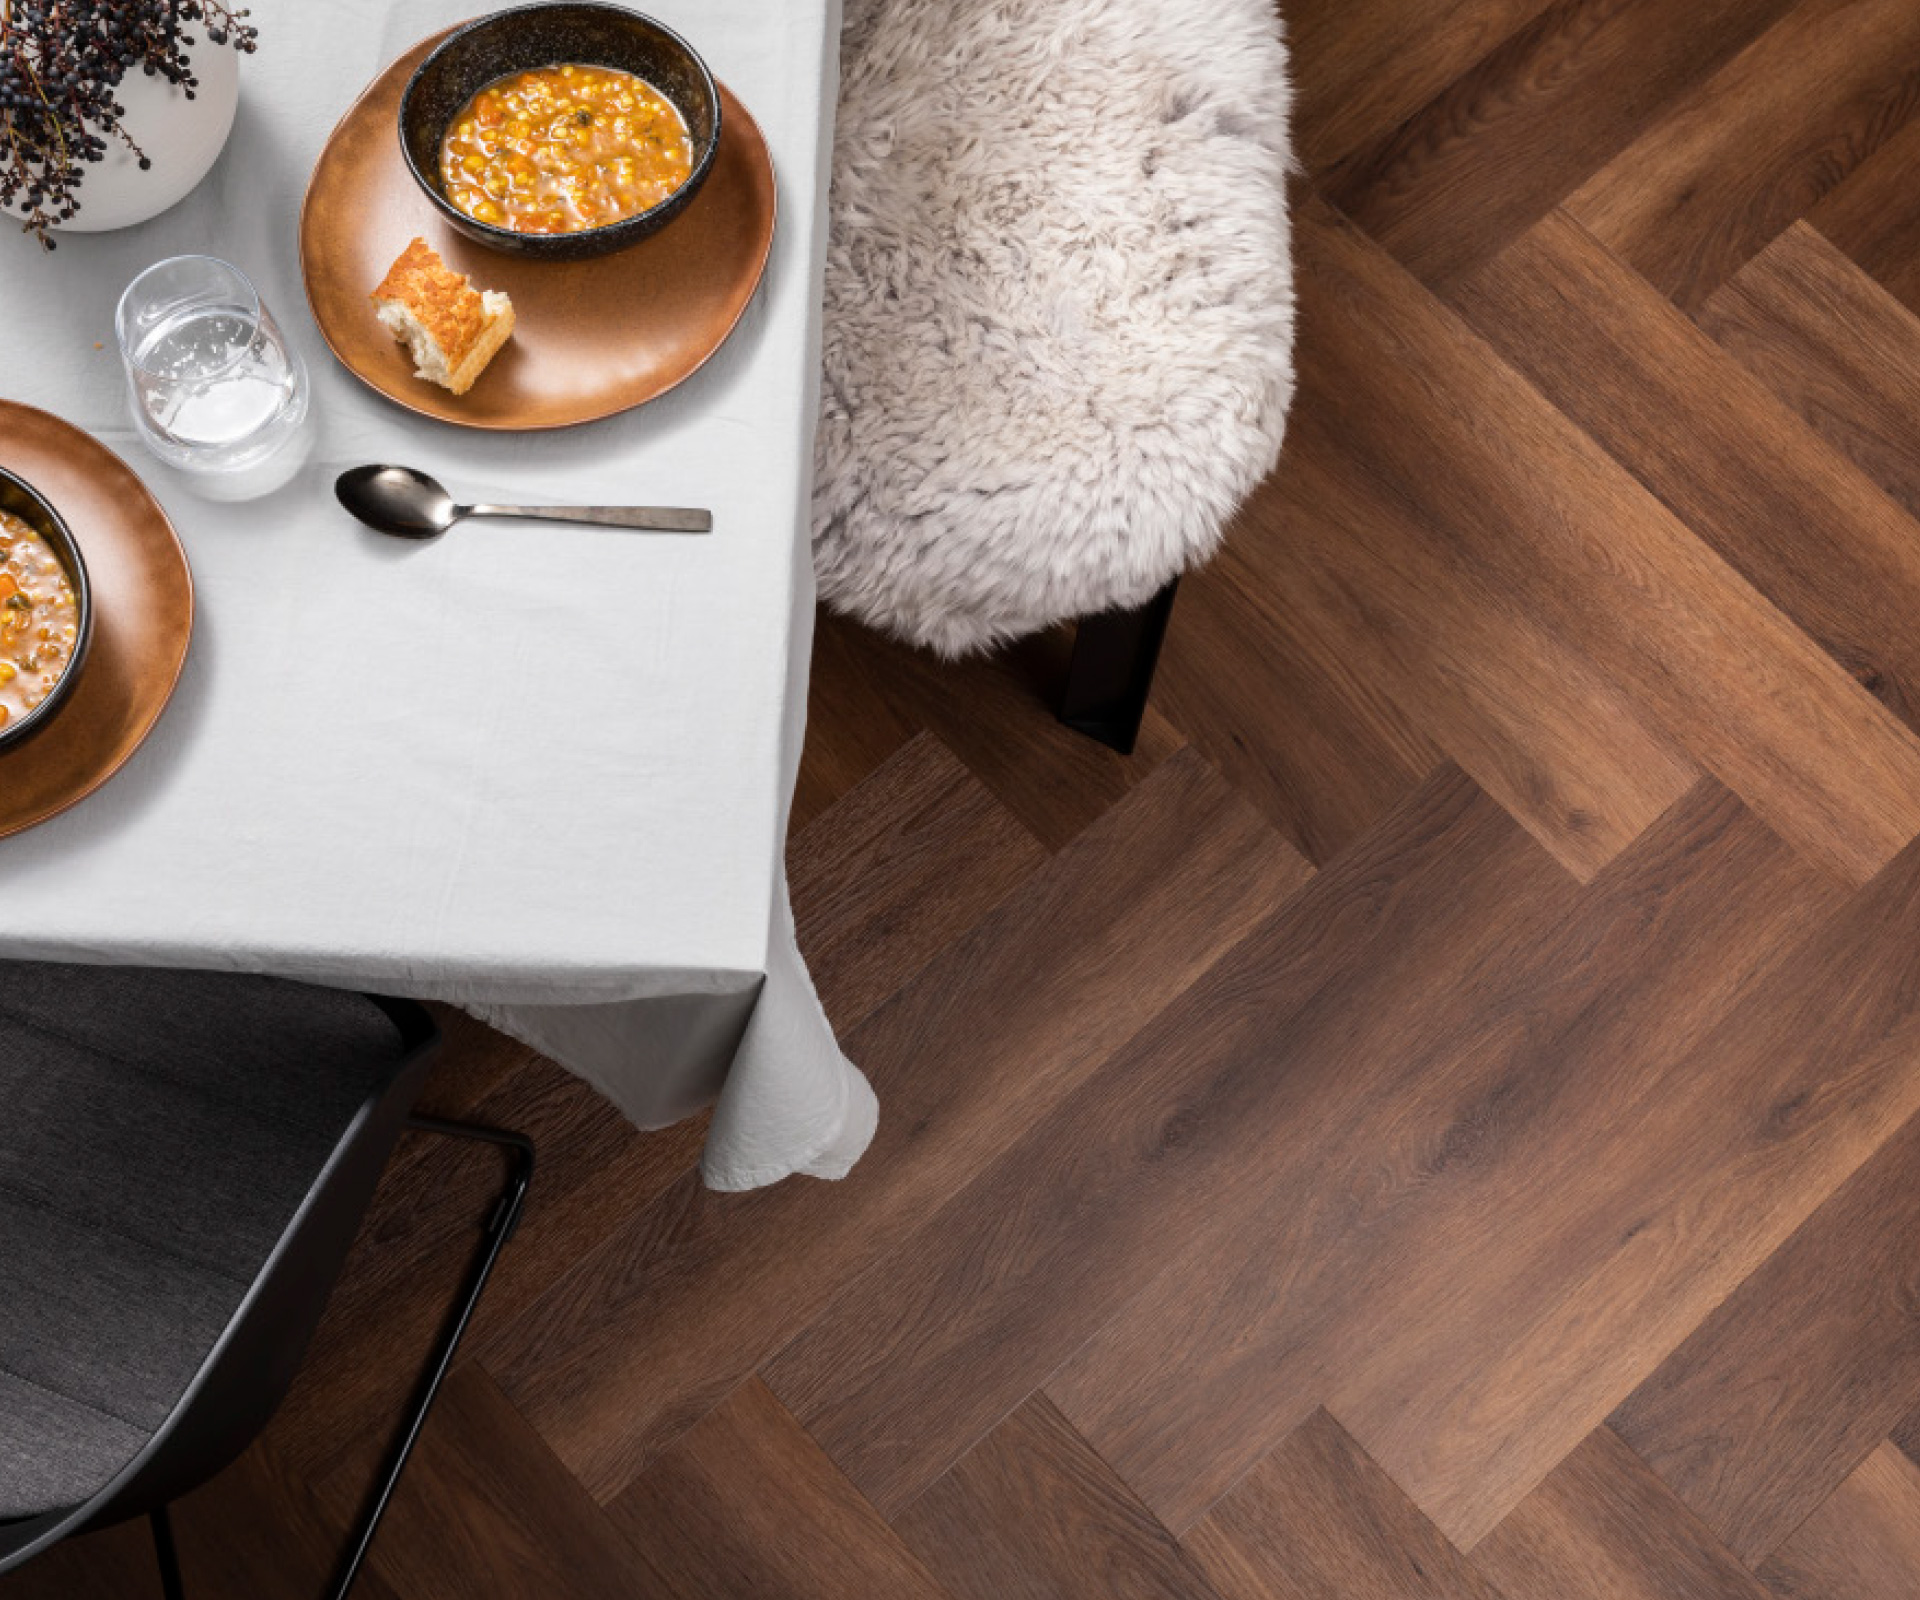 4 Top Flooring Trends That Will Transform The Look And Feel Of Your Home